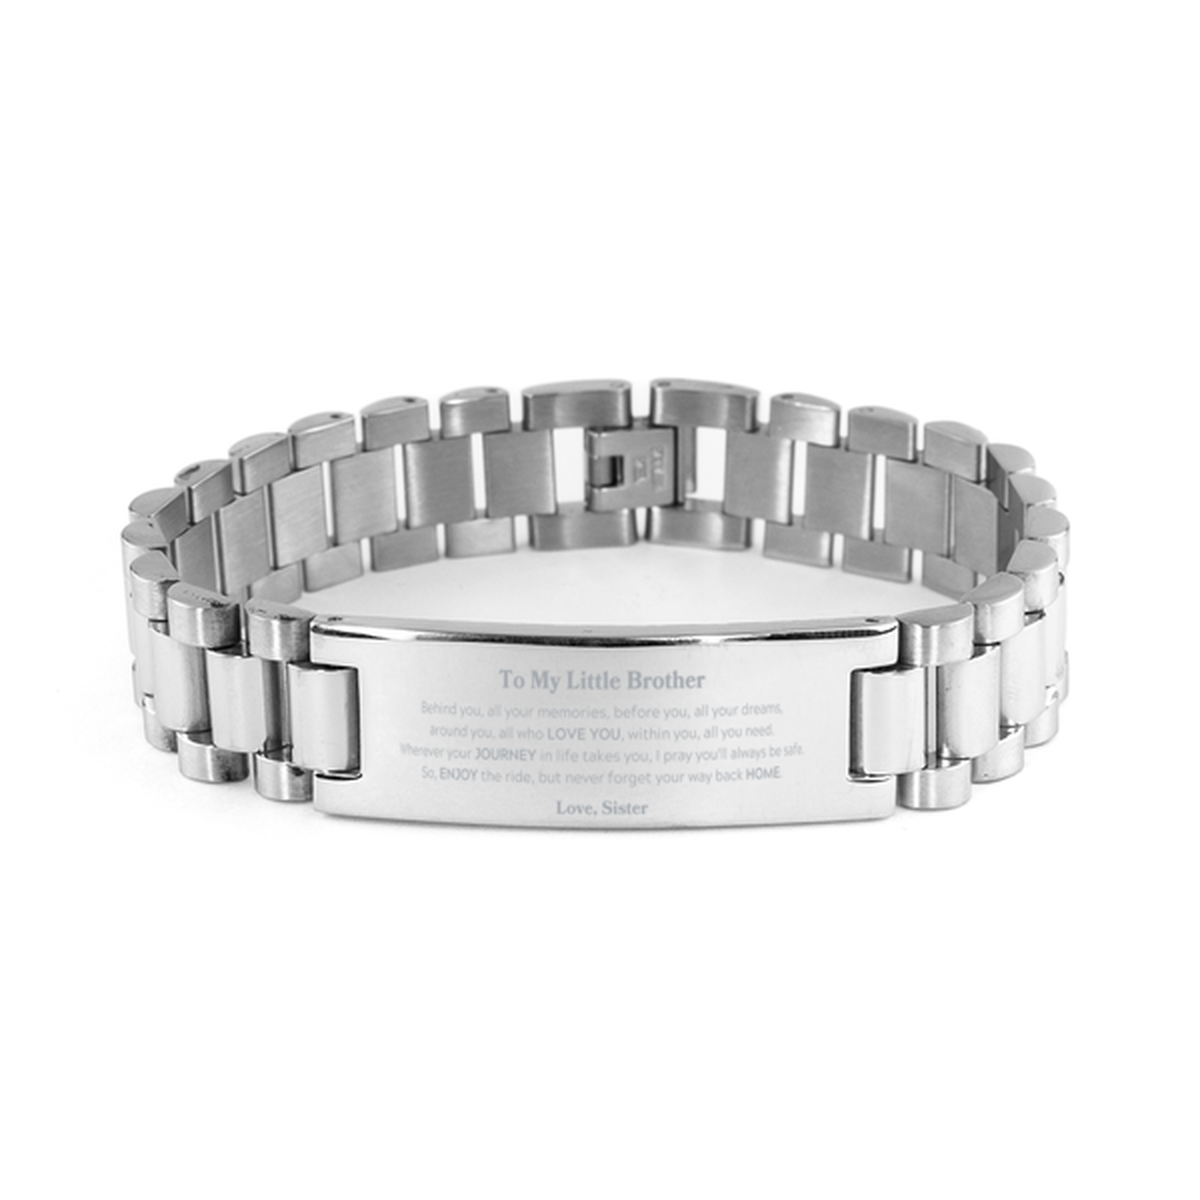 To My Little Brother Graduation Gifts from Sister, Little Brother Ladder Stainless Steel Bracelet Christmas Birthday Gifts for Little Brother Behind you, all your memories, before you, all your dreams. Love, Sister